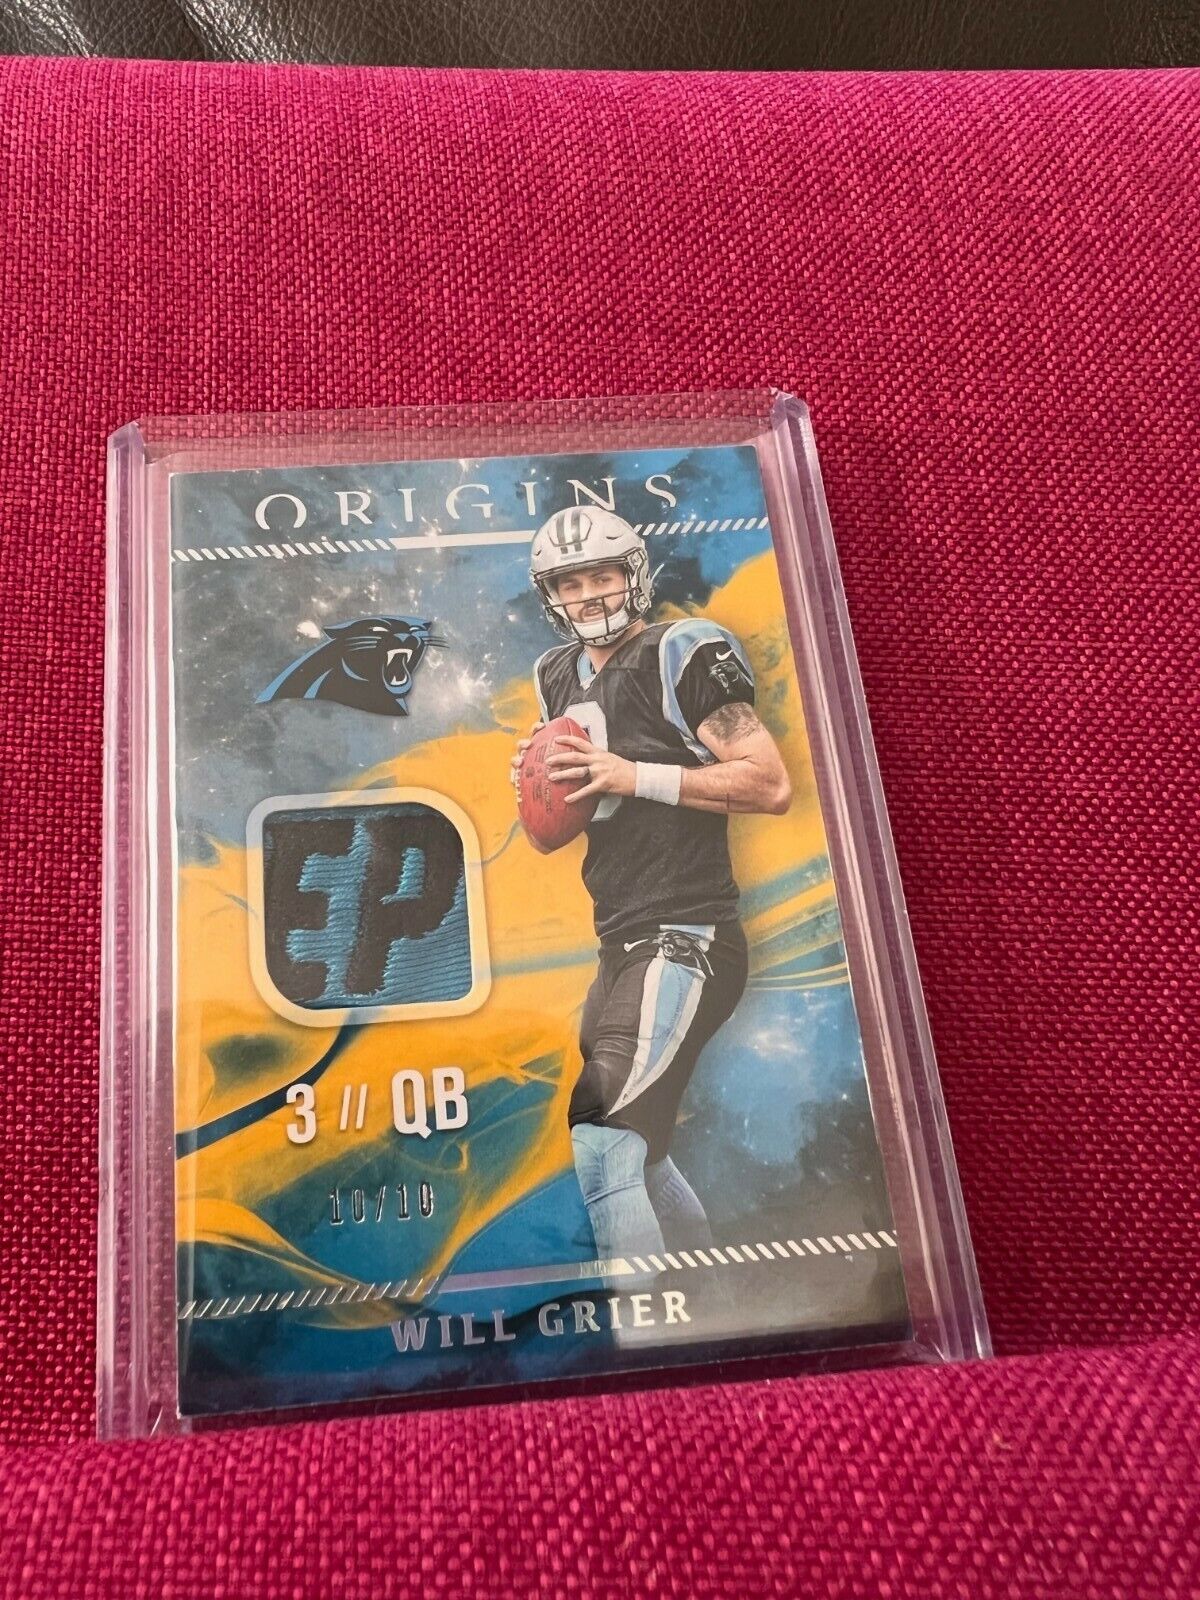 2019 Panini Origins Will Grier Rookie Patch 10/10 RP-5 RC Carolina Panthers